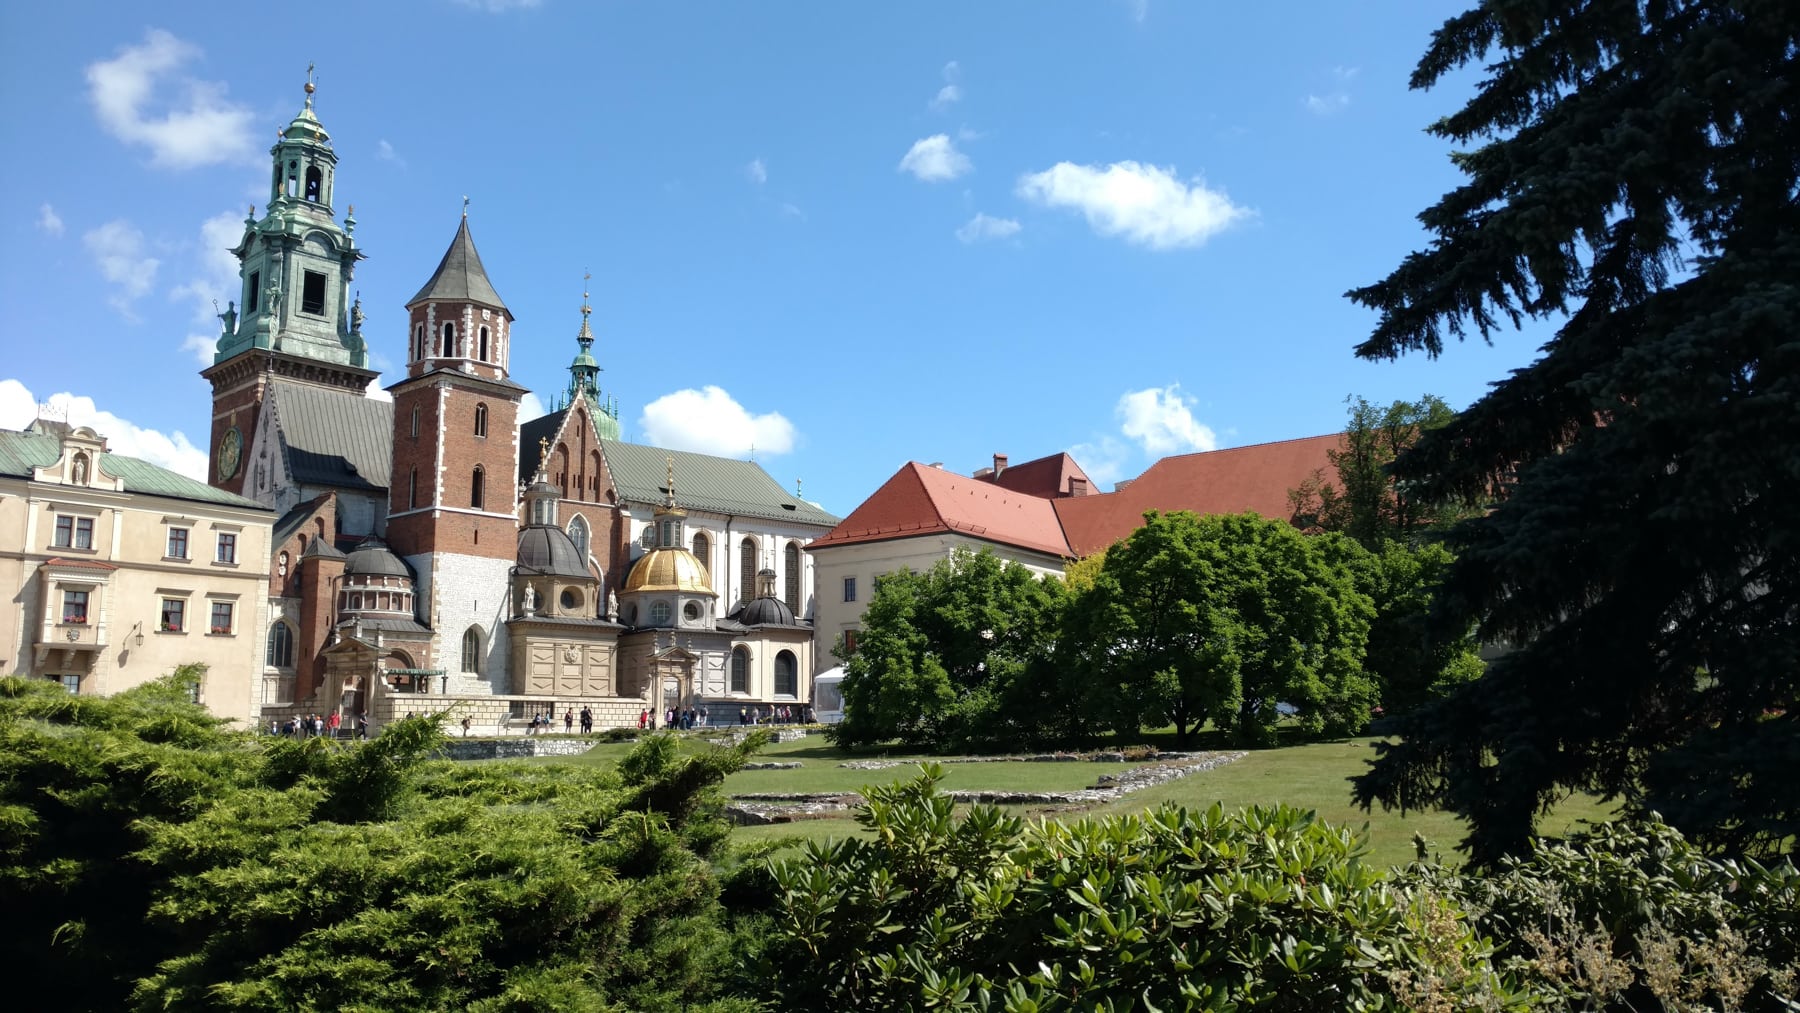 Wawel Hill in Krakow, Poland: A Sacred Site of Mystical Intrigue